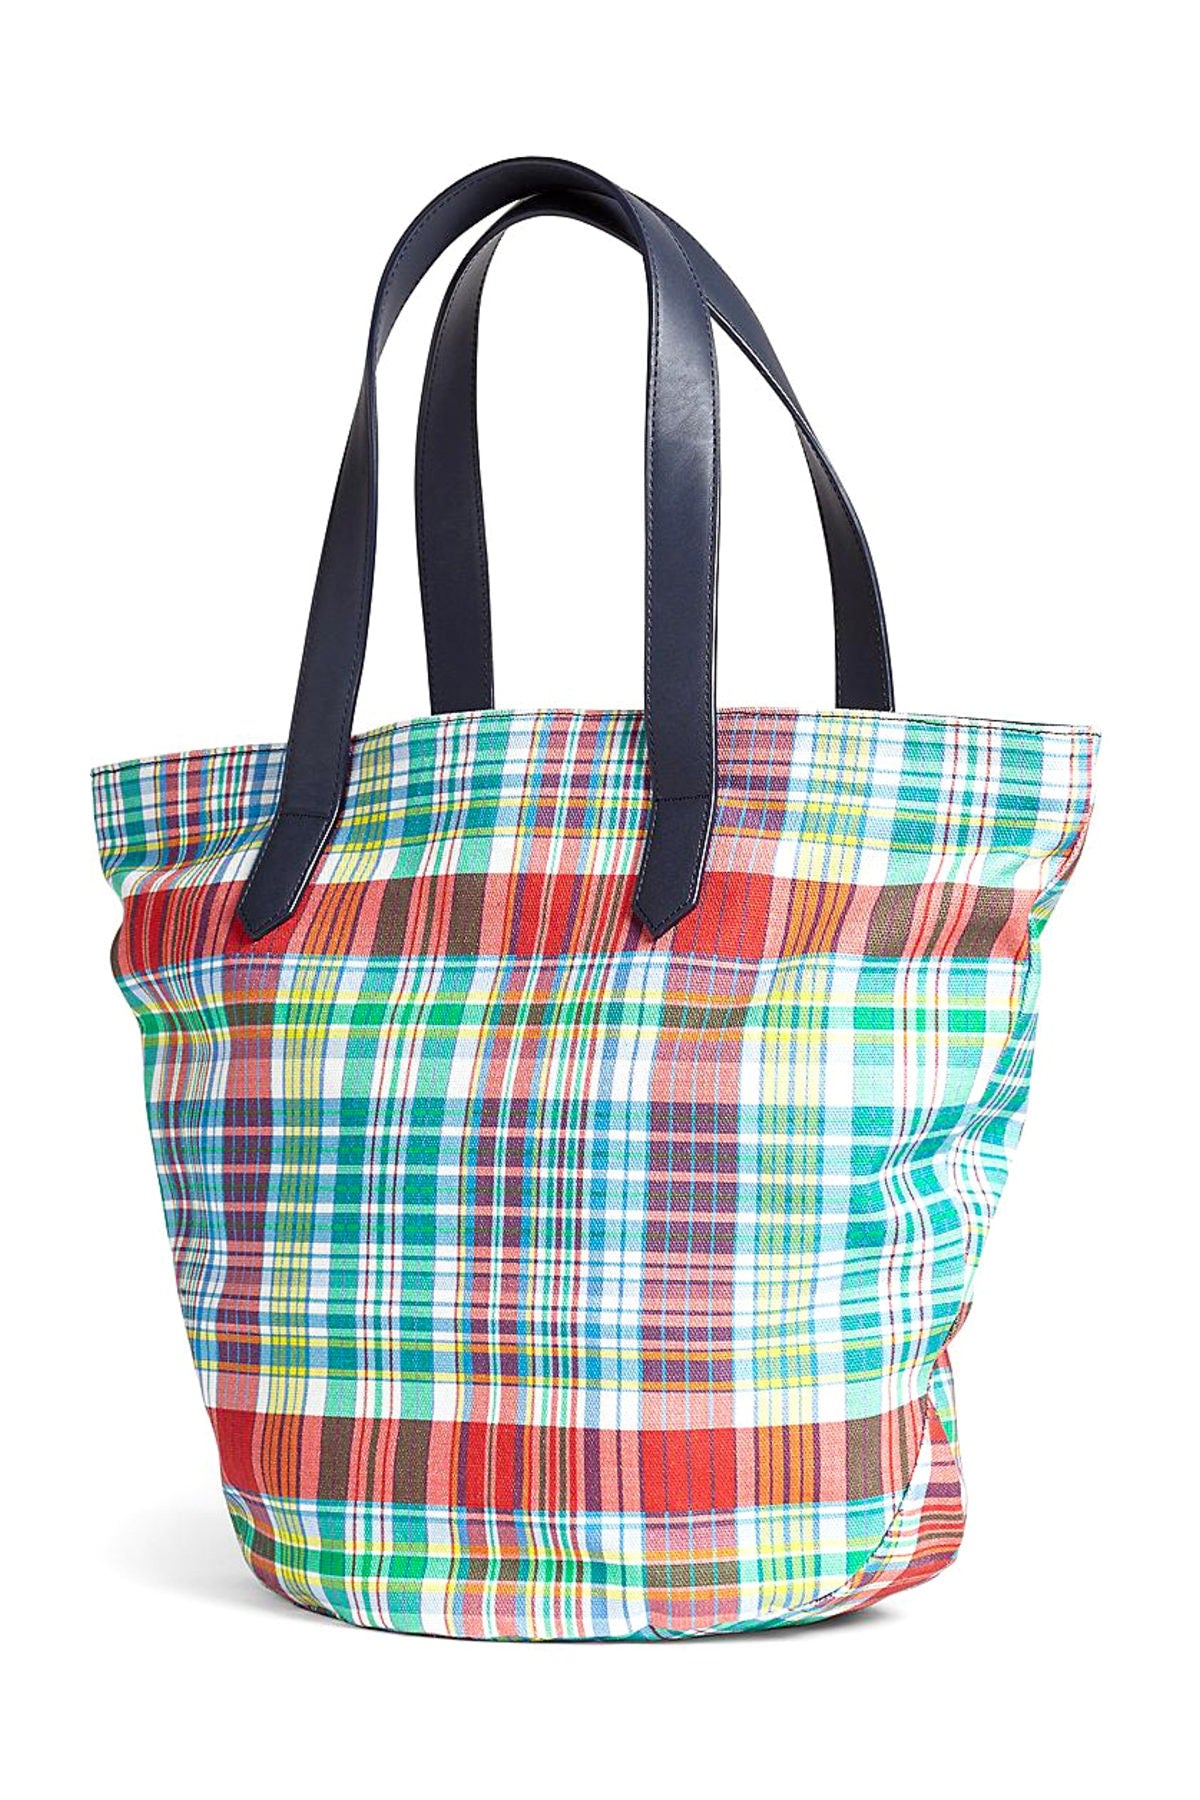 Green and red madras tote bag for women